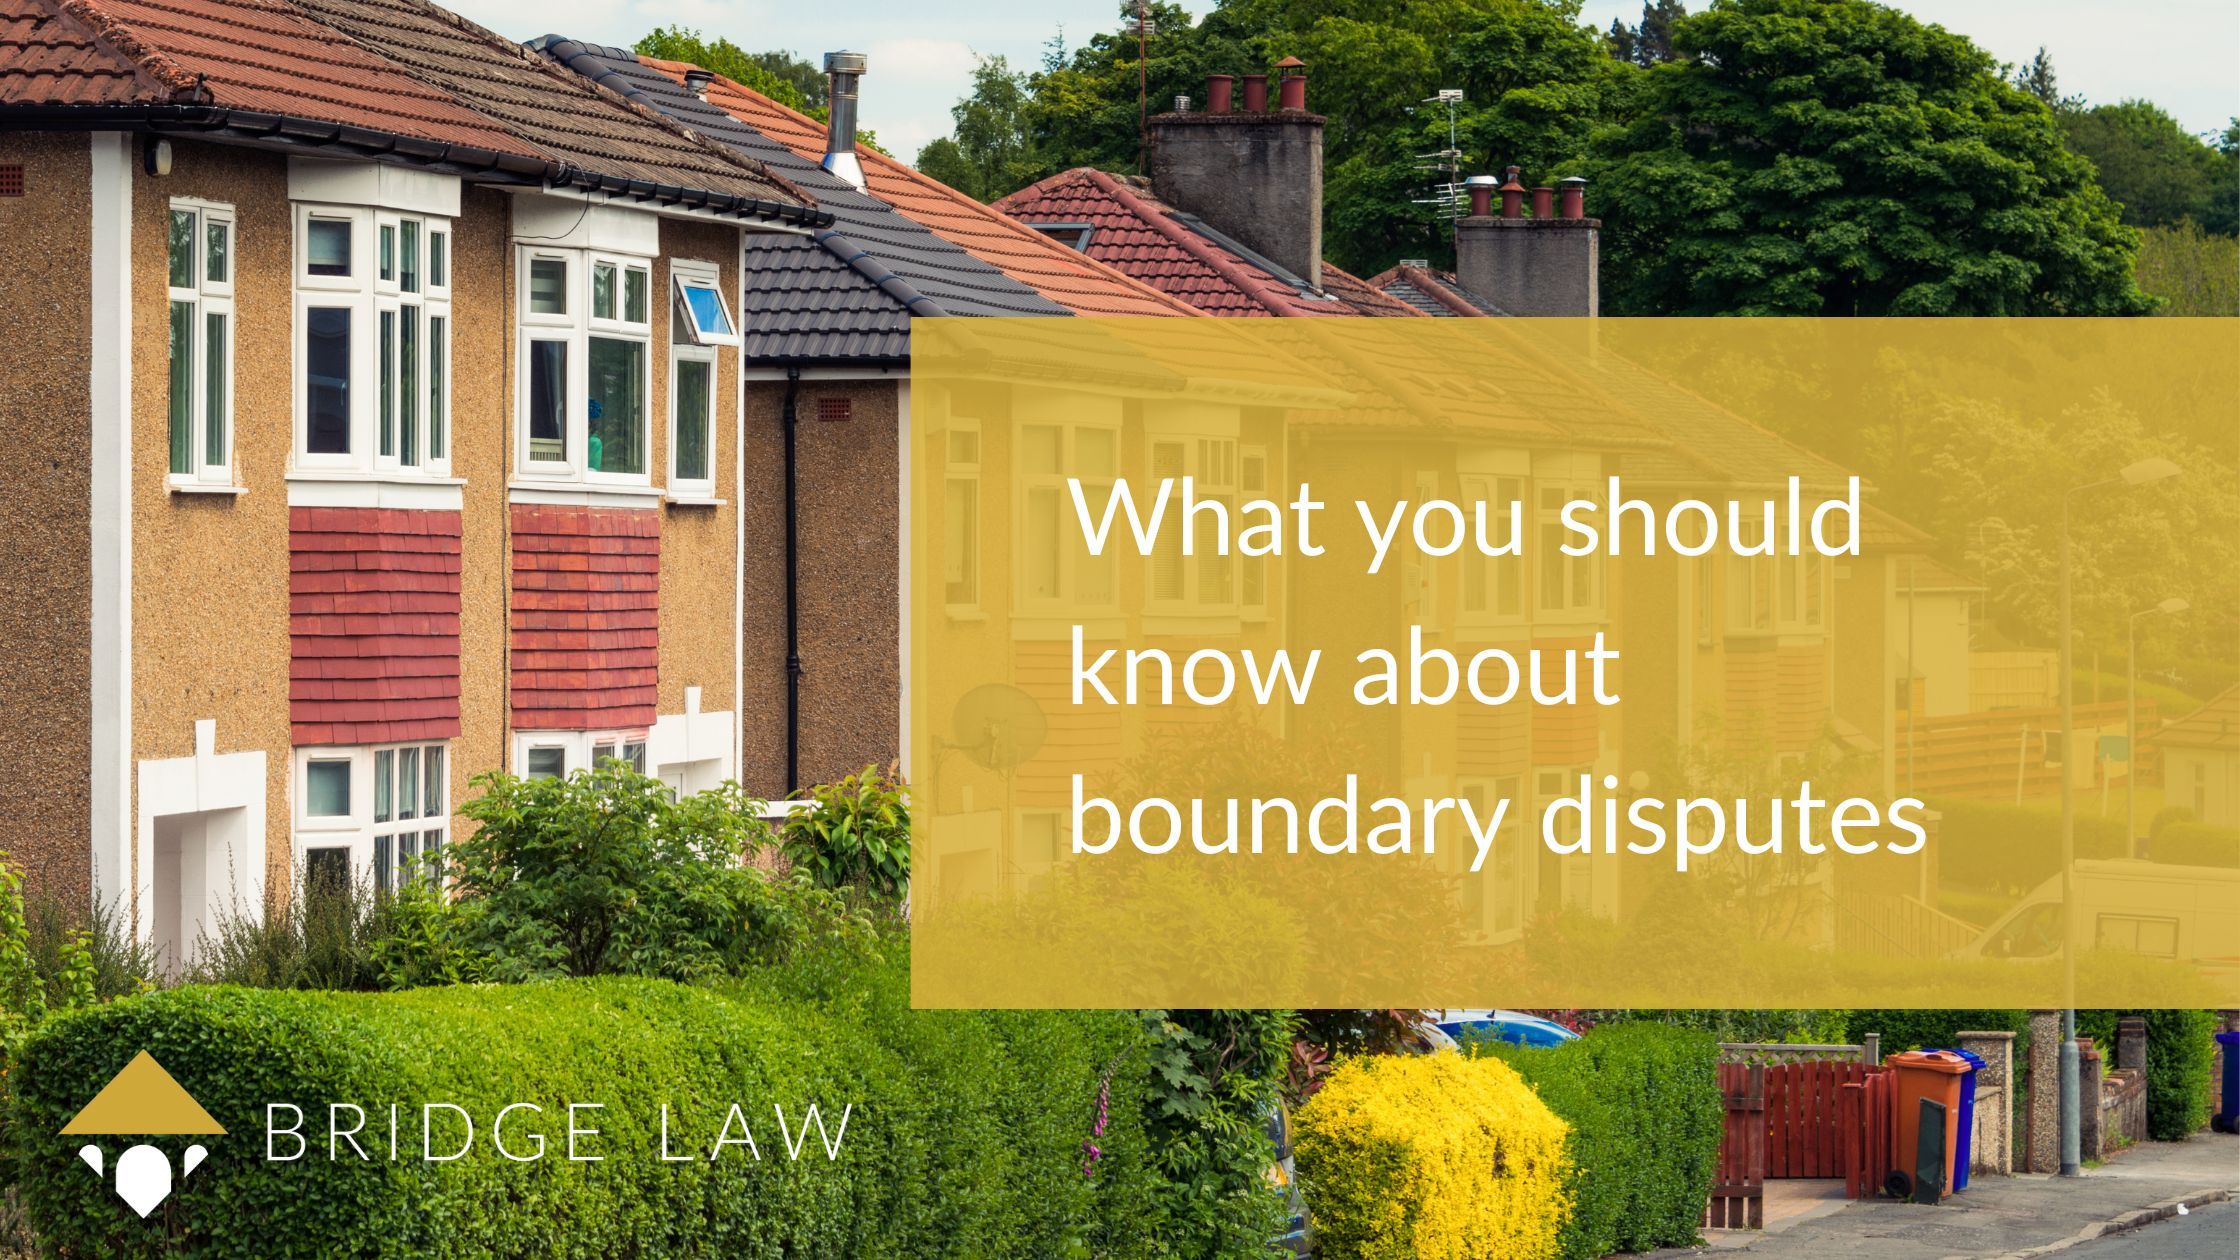 Bridge Law blog header image with text 'what you should know about boundary disputes'